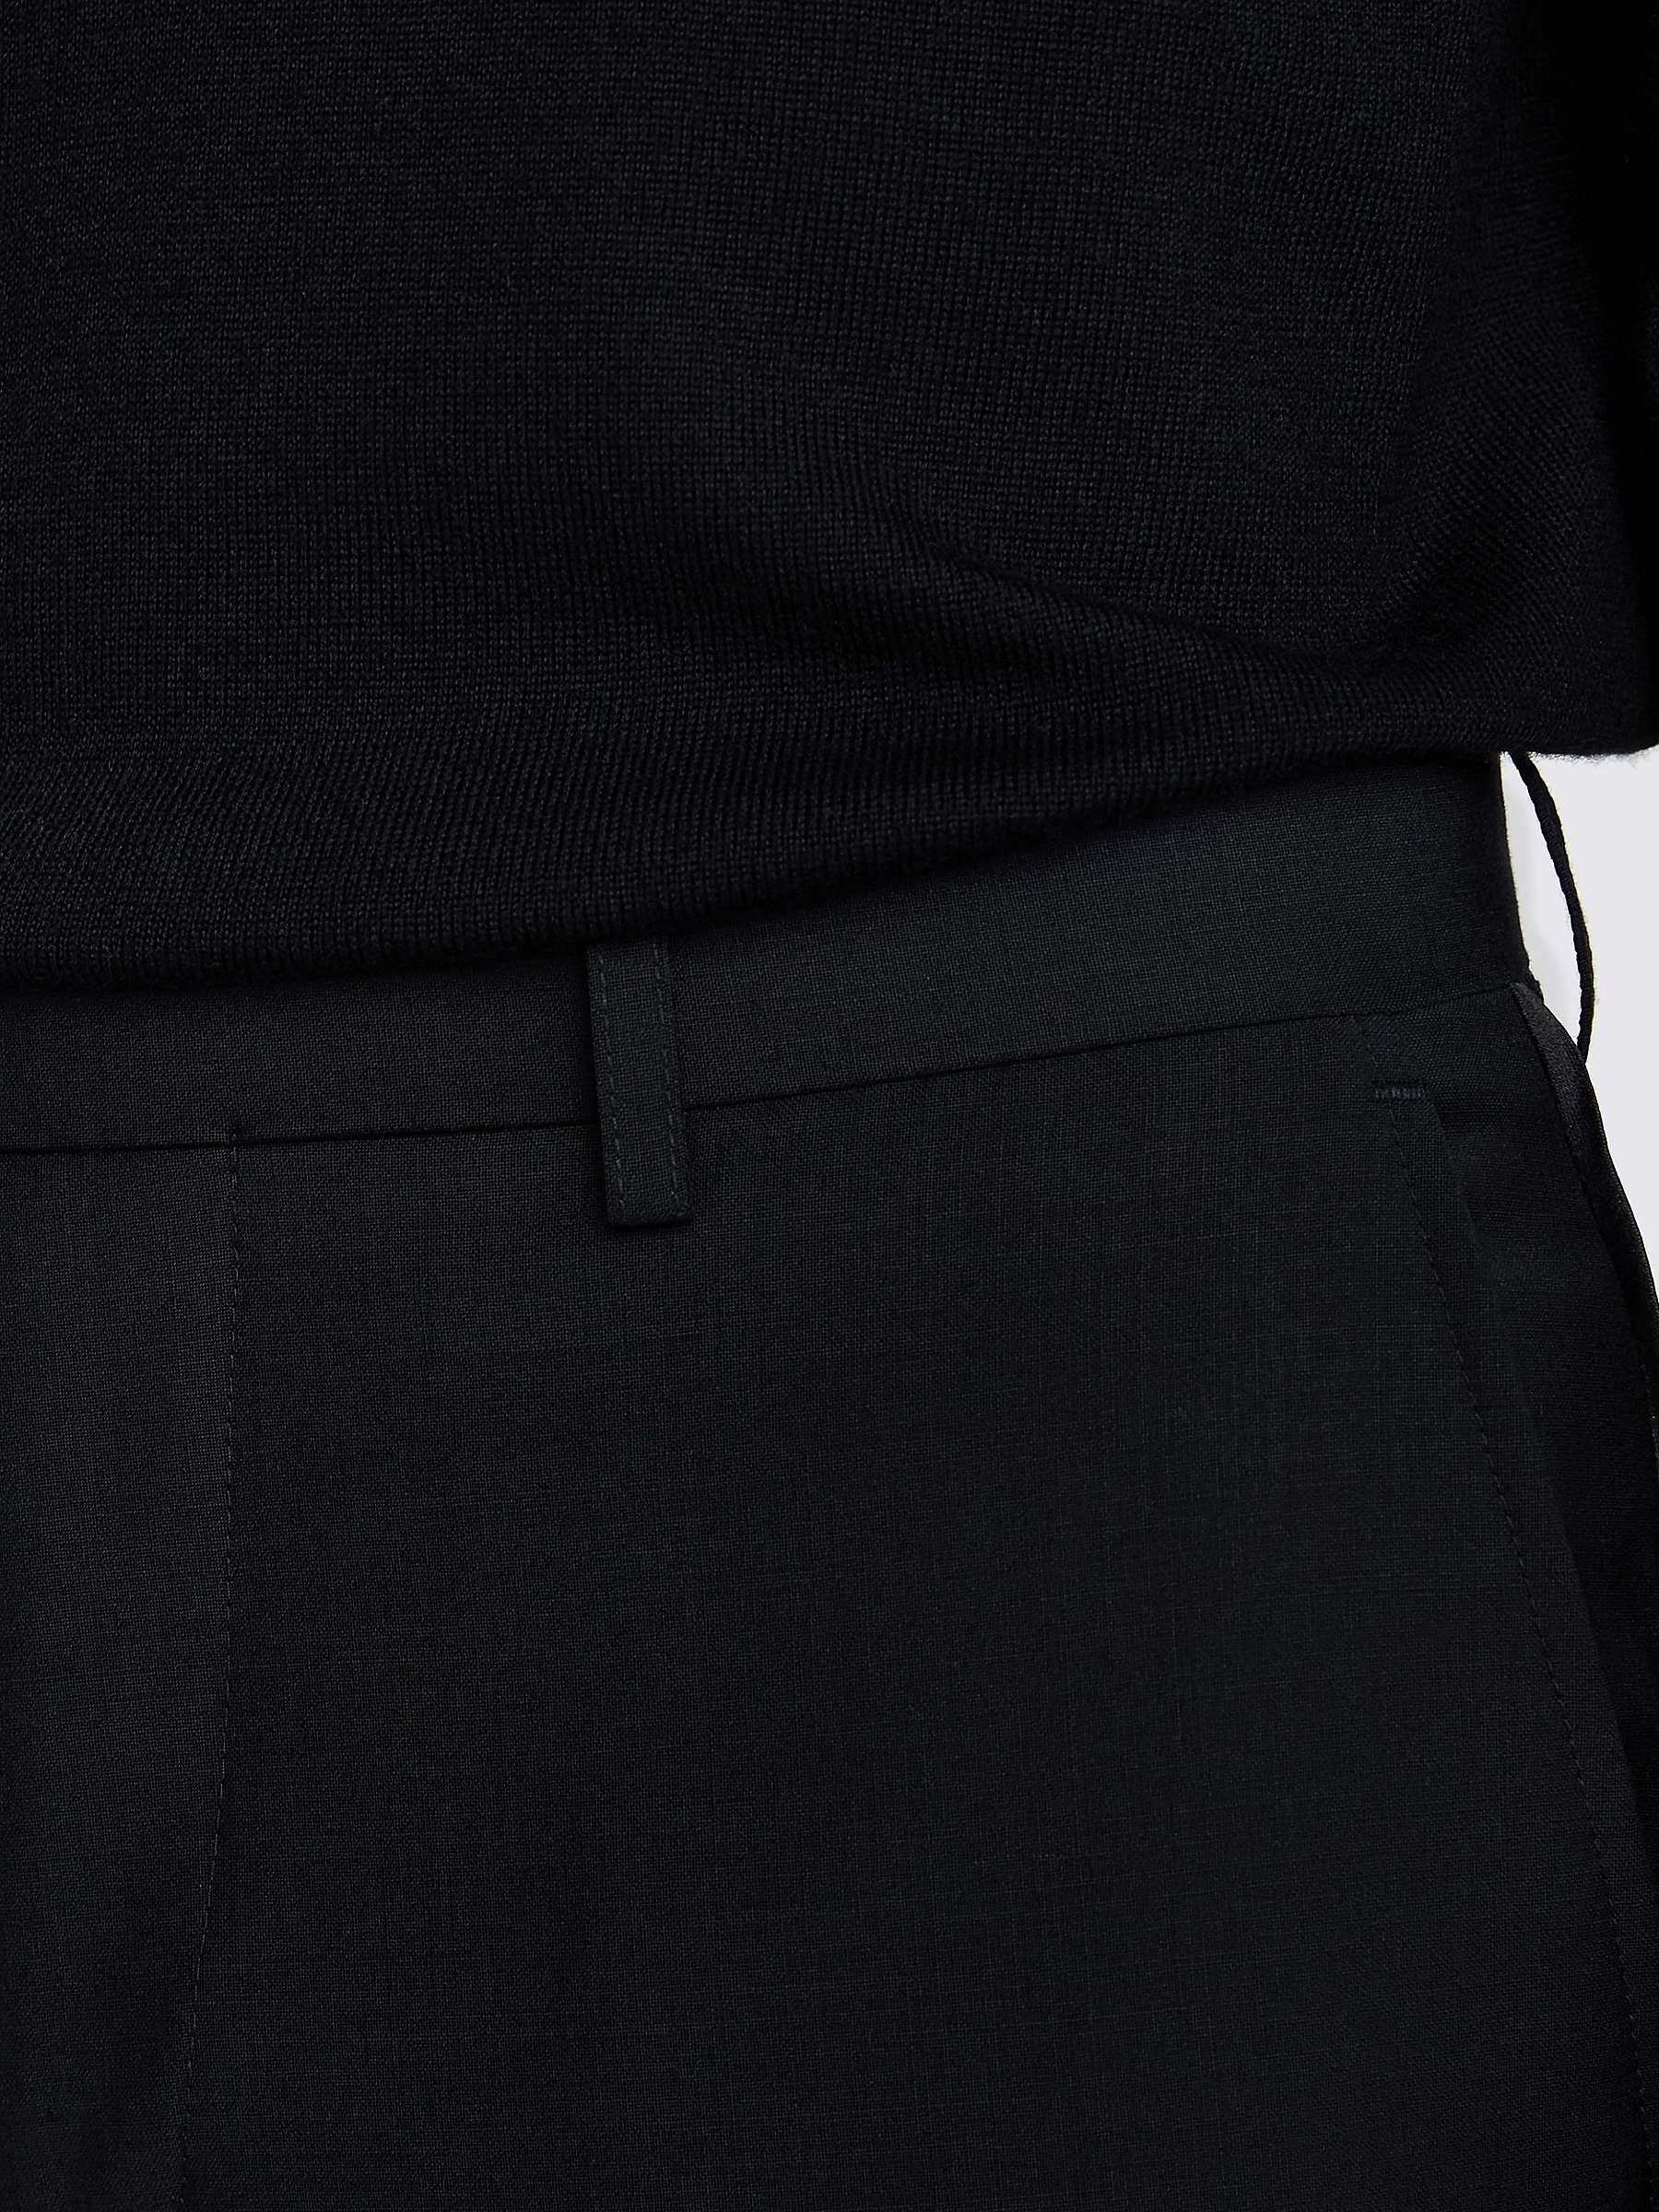 Buy Moss Tailored Wool Blend Dress Trousers, Black Online at johnlewis.com